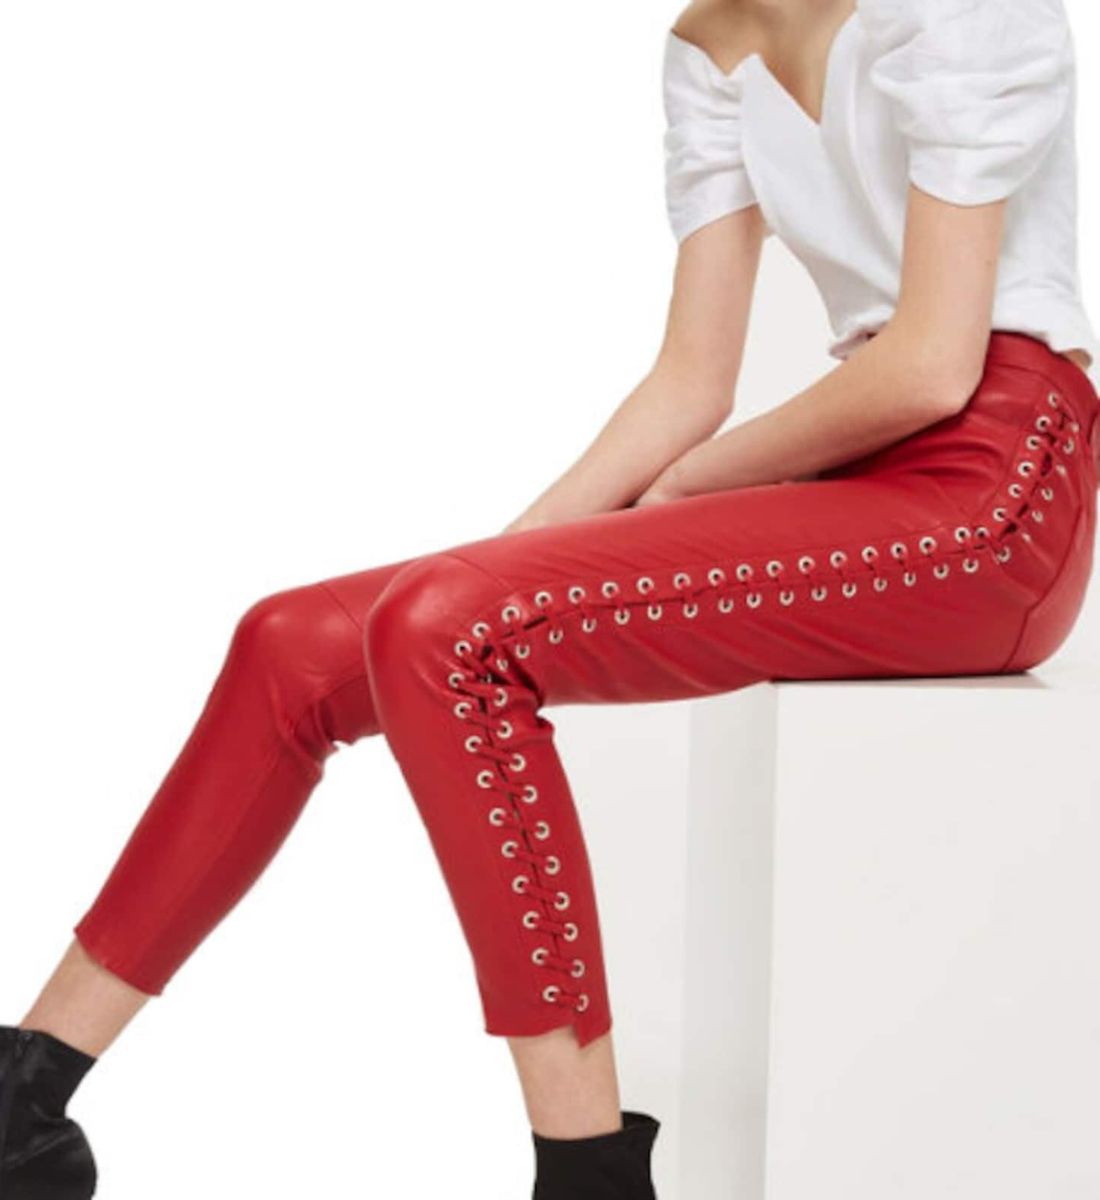 Lace It Up in Red: Handmade Leather Pants for Women